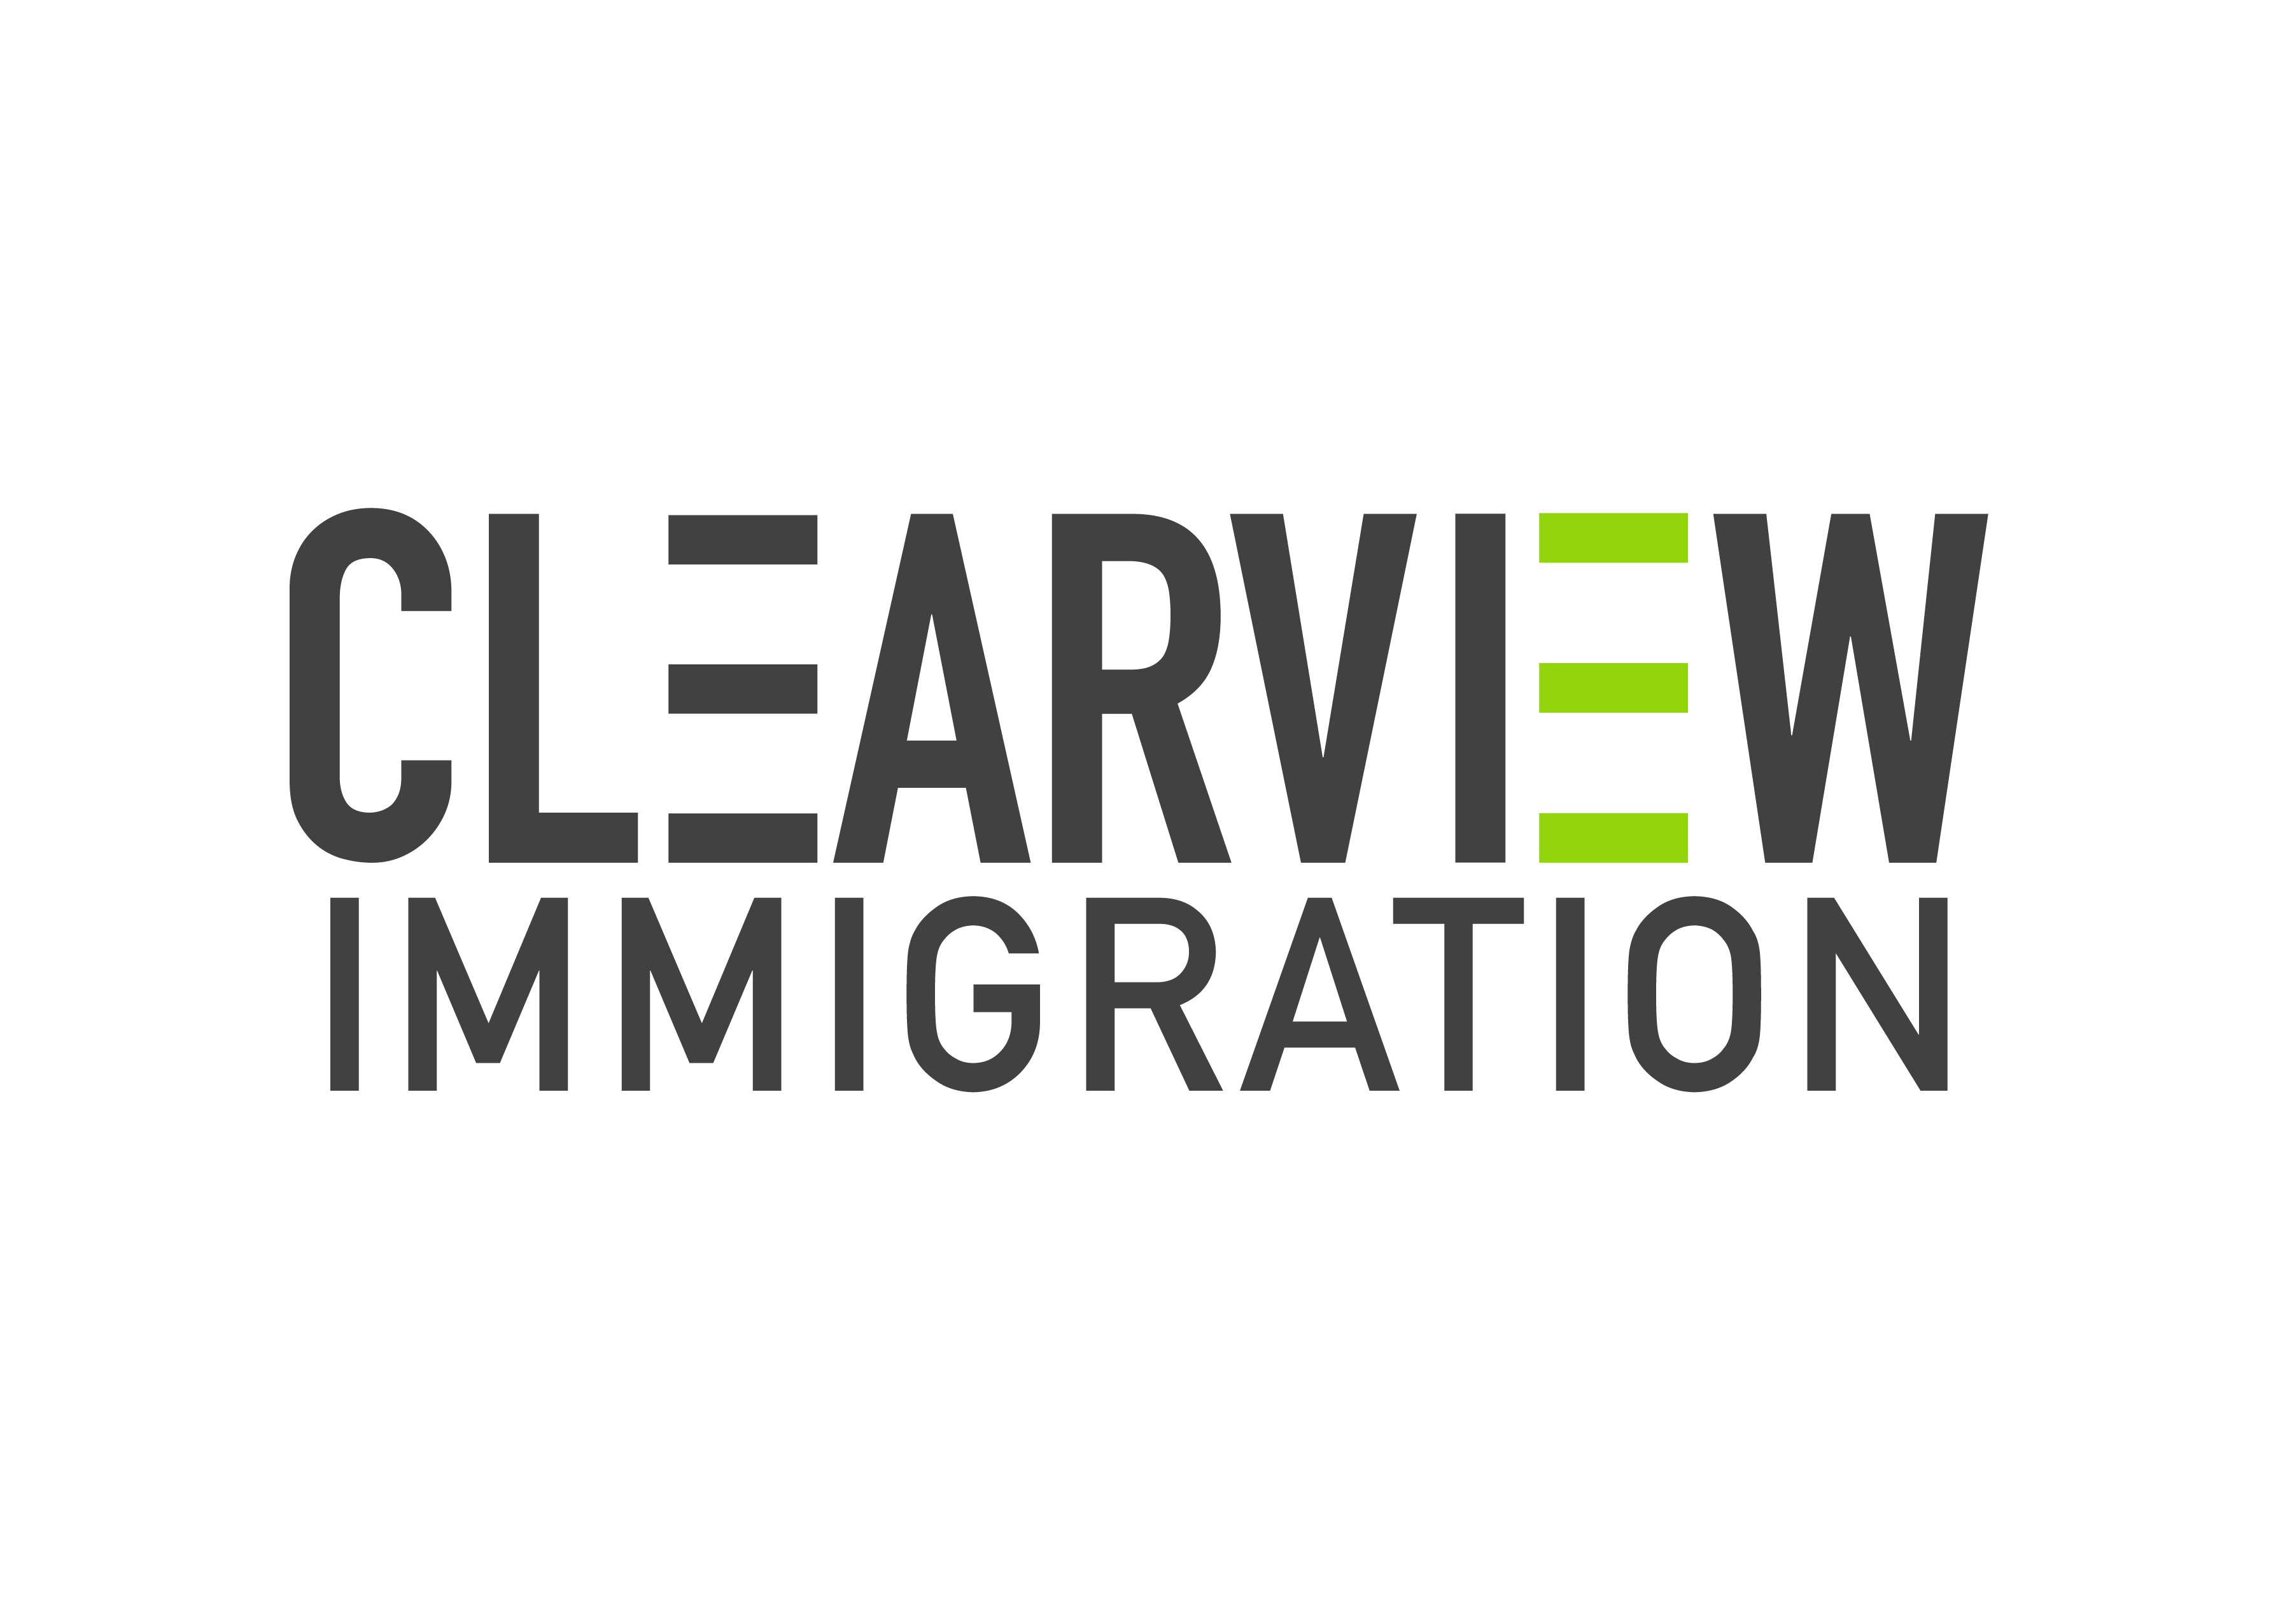 Clearview immigration